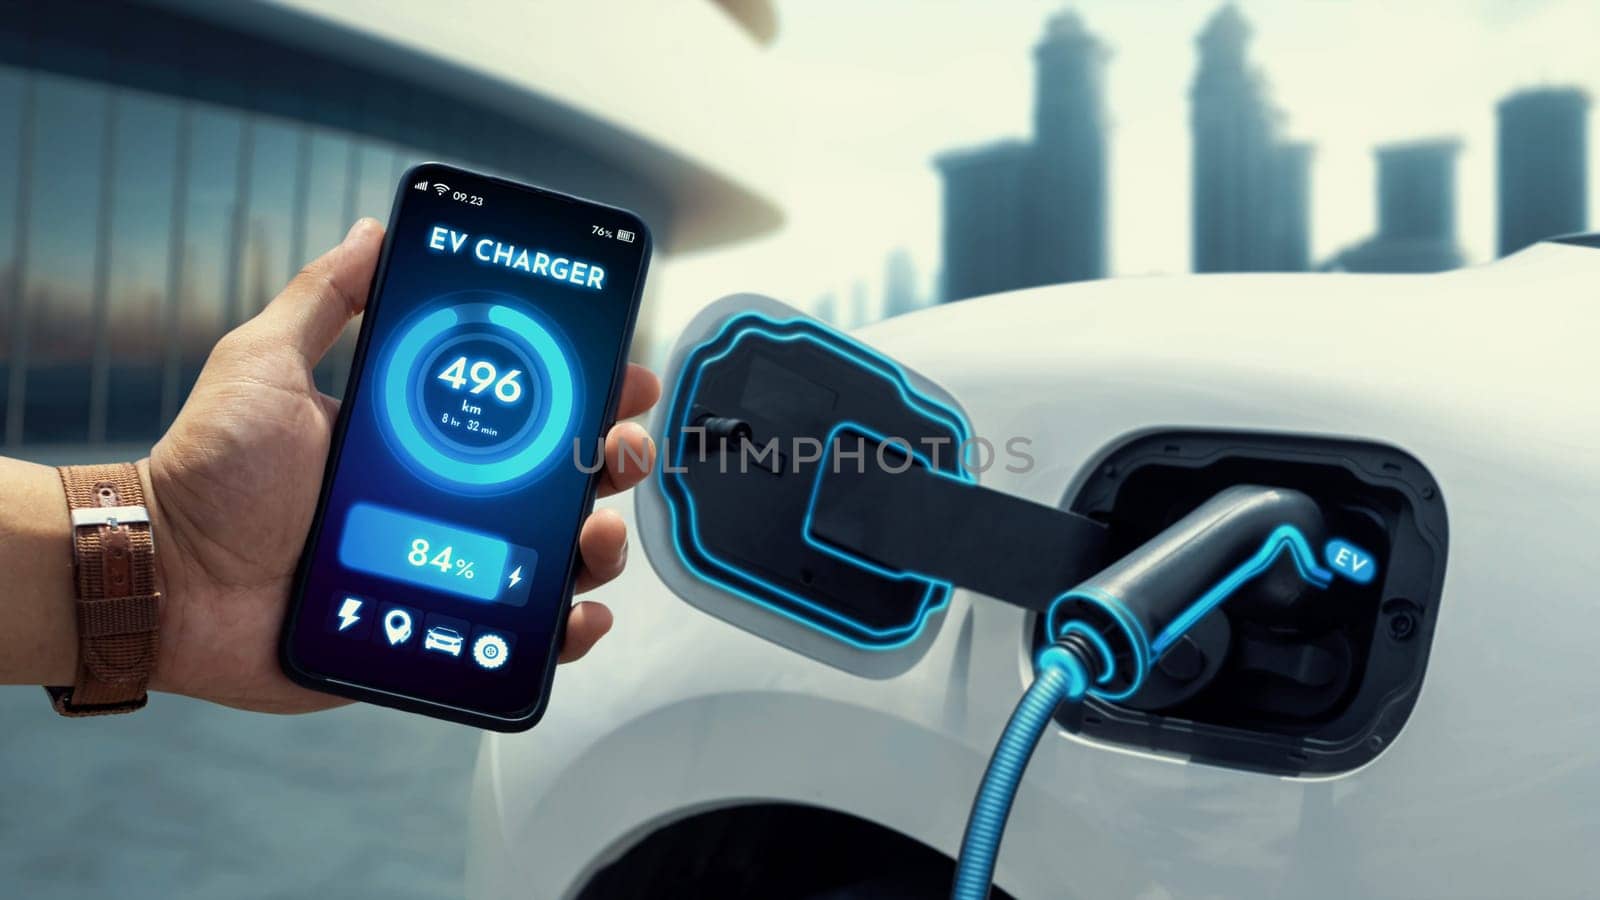 EV car battery status on EV smartphone application while recharge battery from public city charging station. Innovative technological advancement of EV car and alternative energy utilization. Peruse